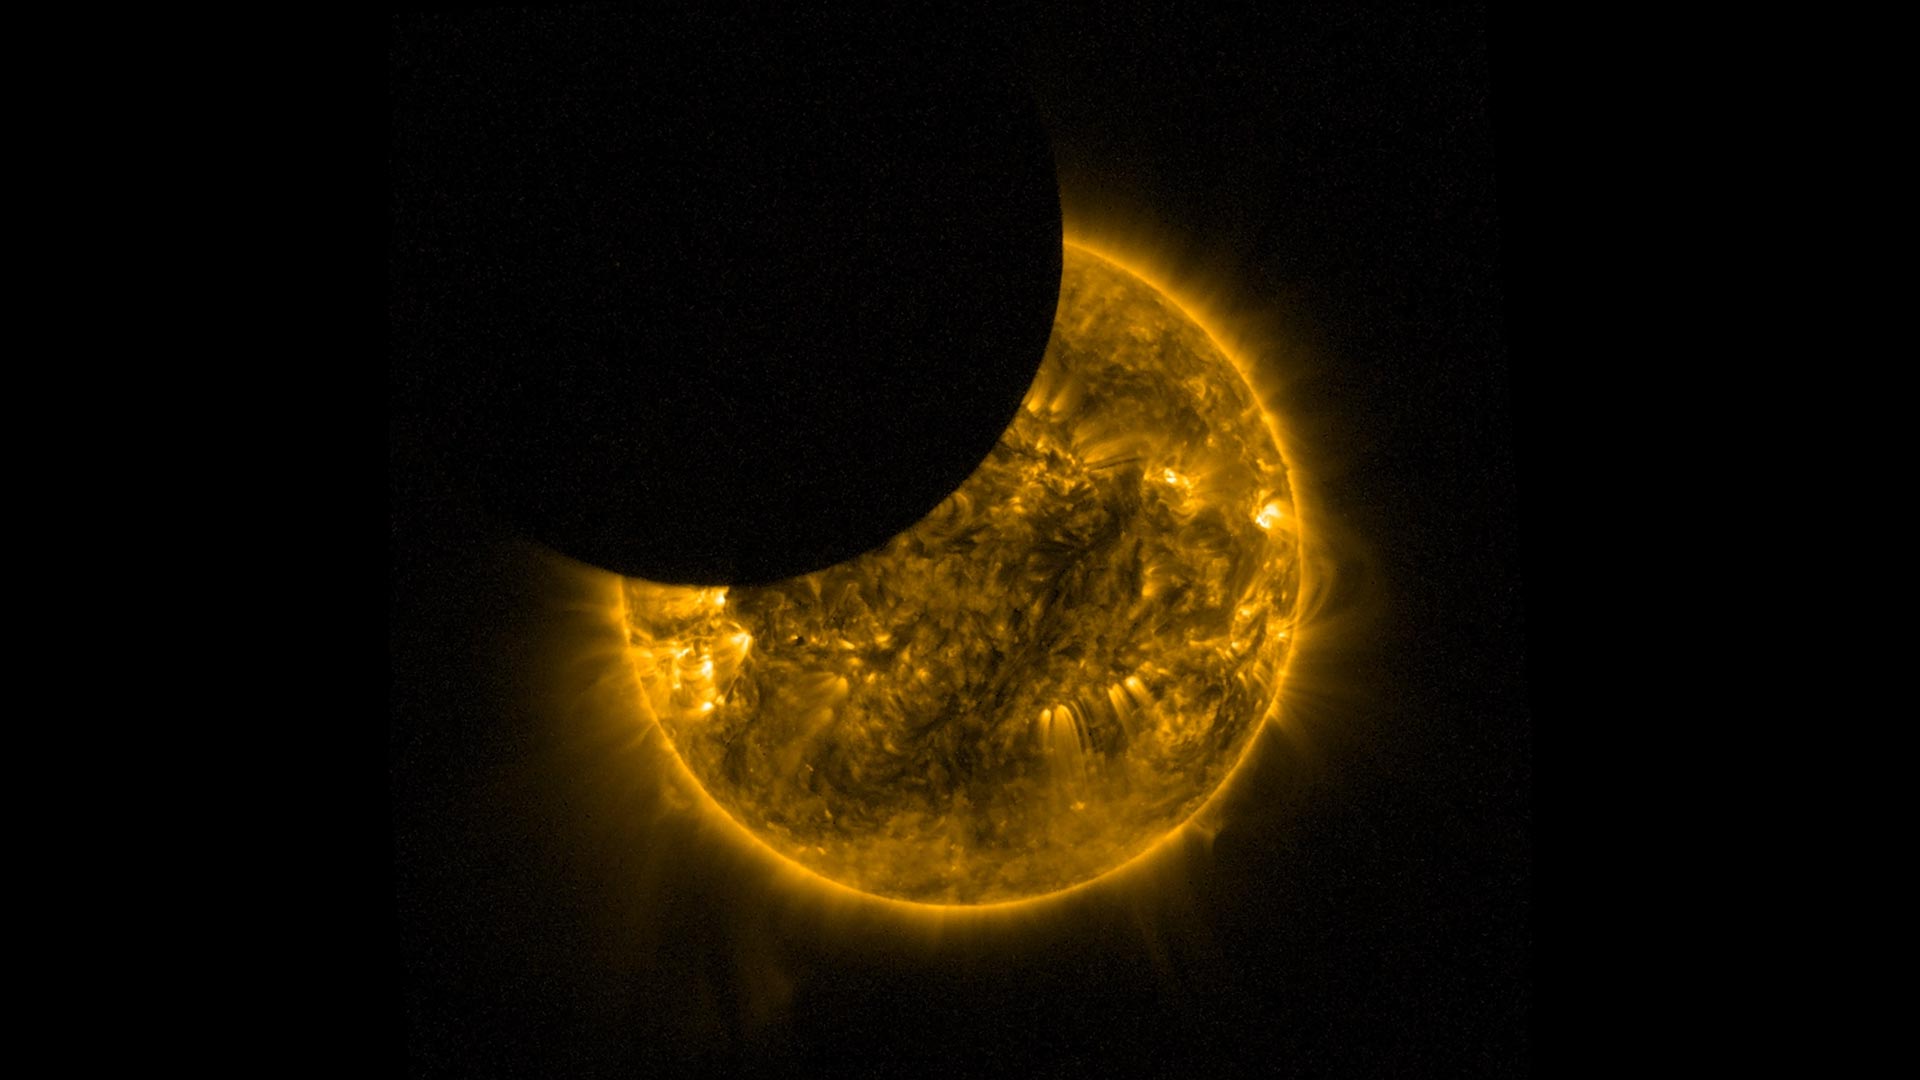 Proba2 Satellite Sees the Moon Eclipse the Sun Twice [Video]